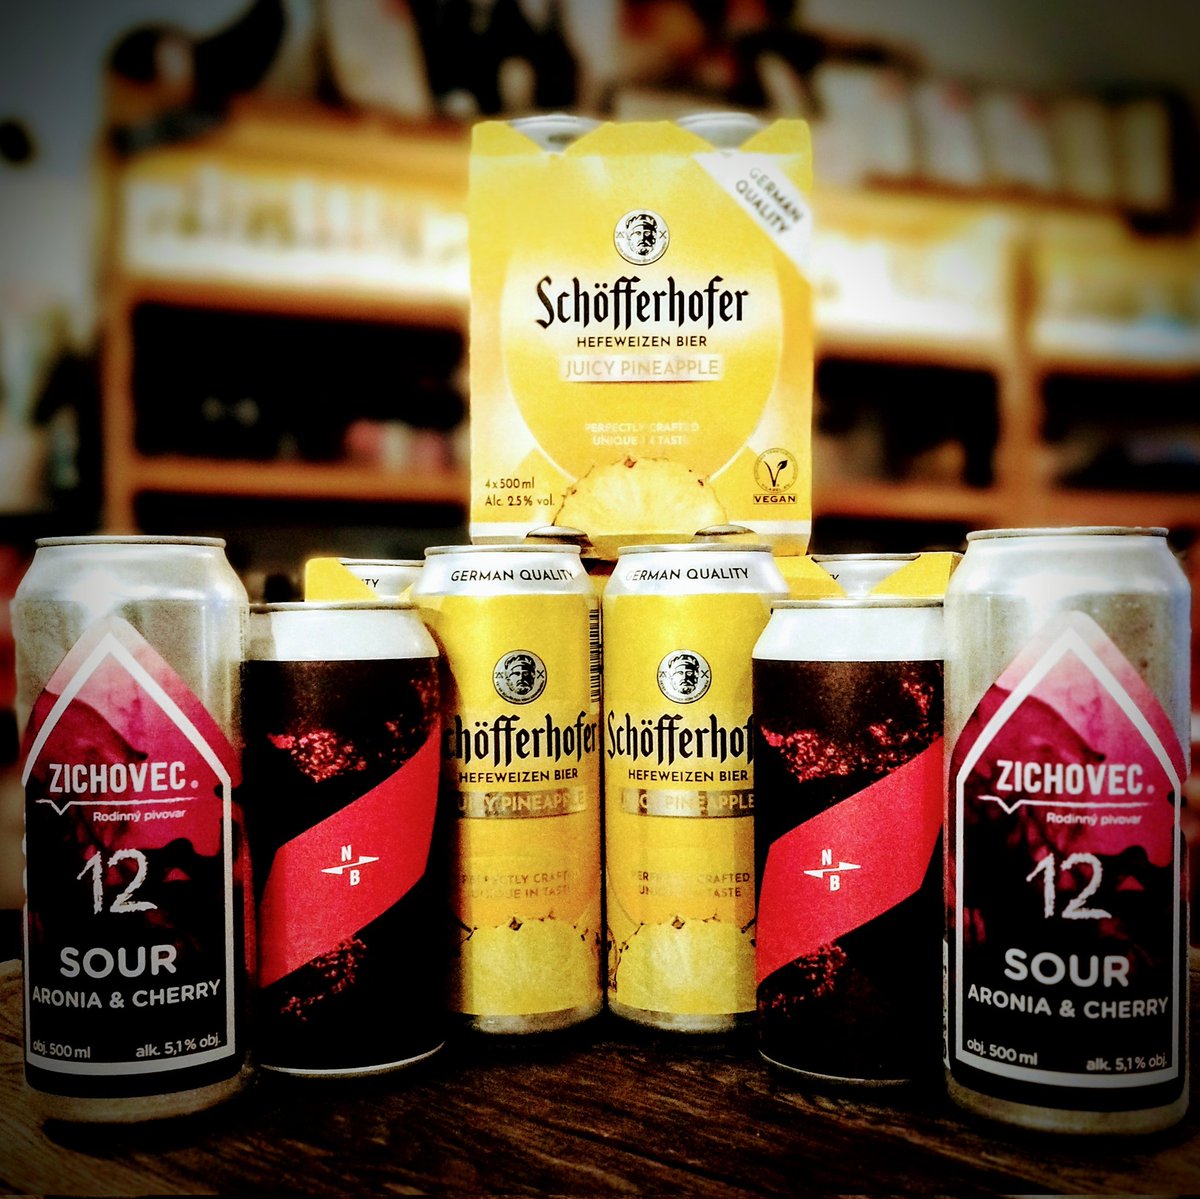 Schofferhofer Offer! Take away four pack for just £7.60! Plus, we've got a couple of new sours... Aronia and Cherry from Czechia's Zichovec, and a North Brewing Blood Orange and Rhubarb sour. Open at 4pm 👍 #colwynbay #alehouse #pub